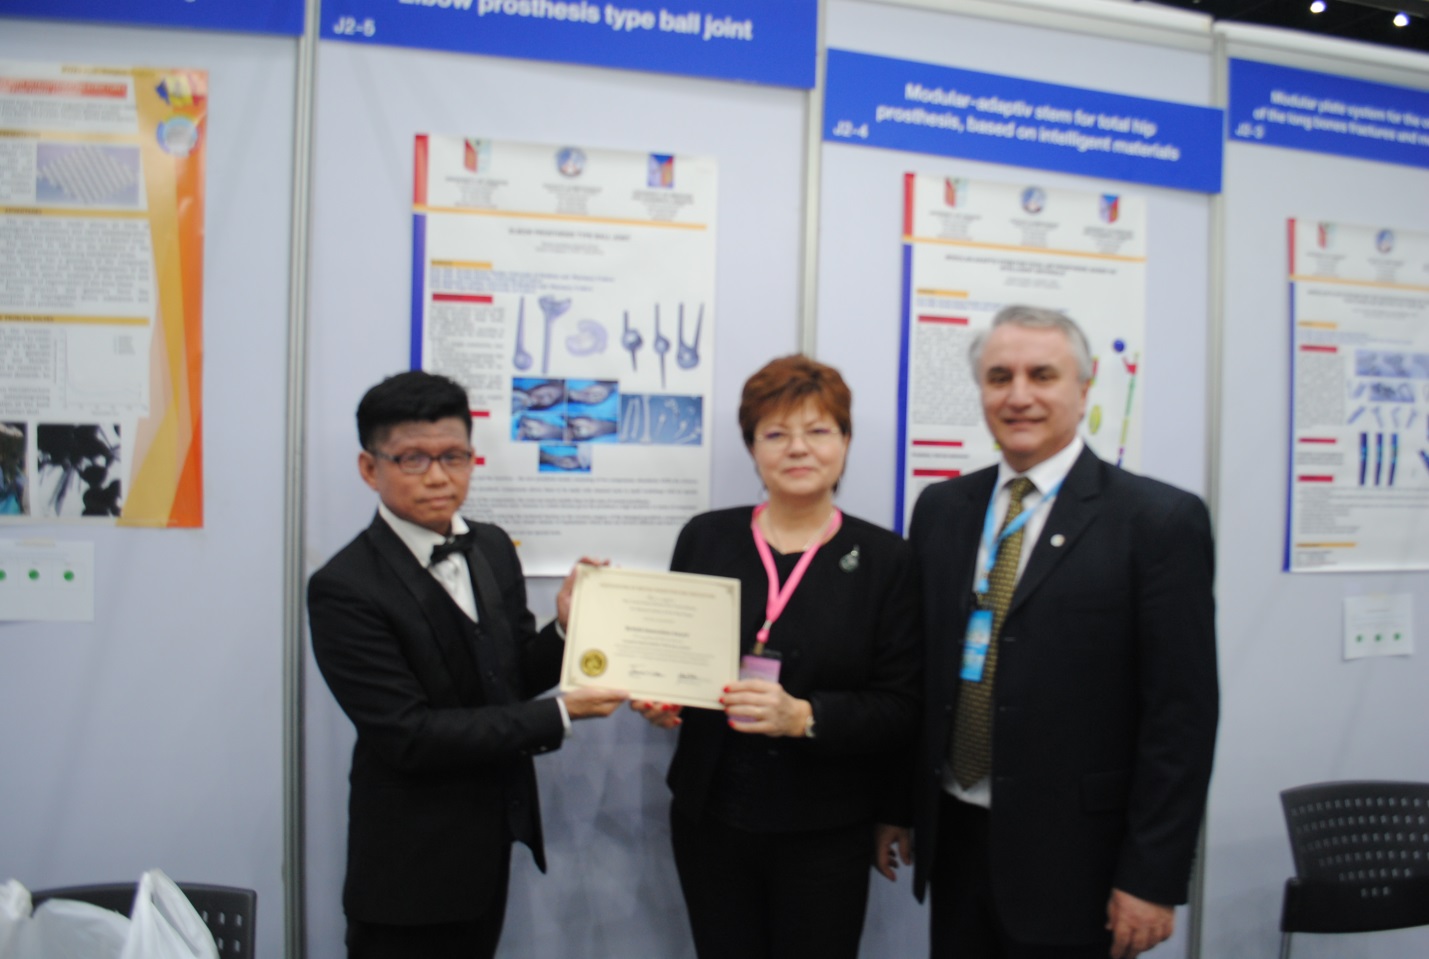 soto2004.ro - International Intellectual Property, Invention, Innovation and Technology Exposition, IPITEx 2018 (9)